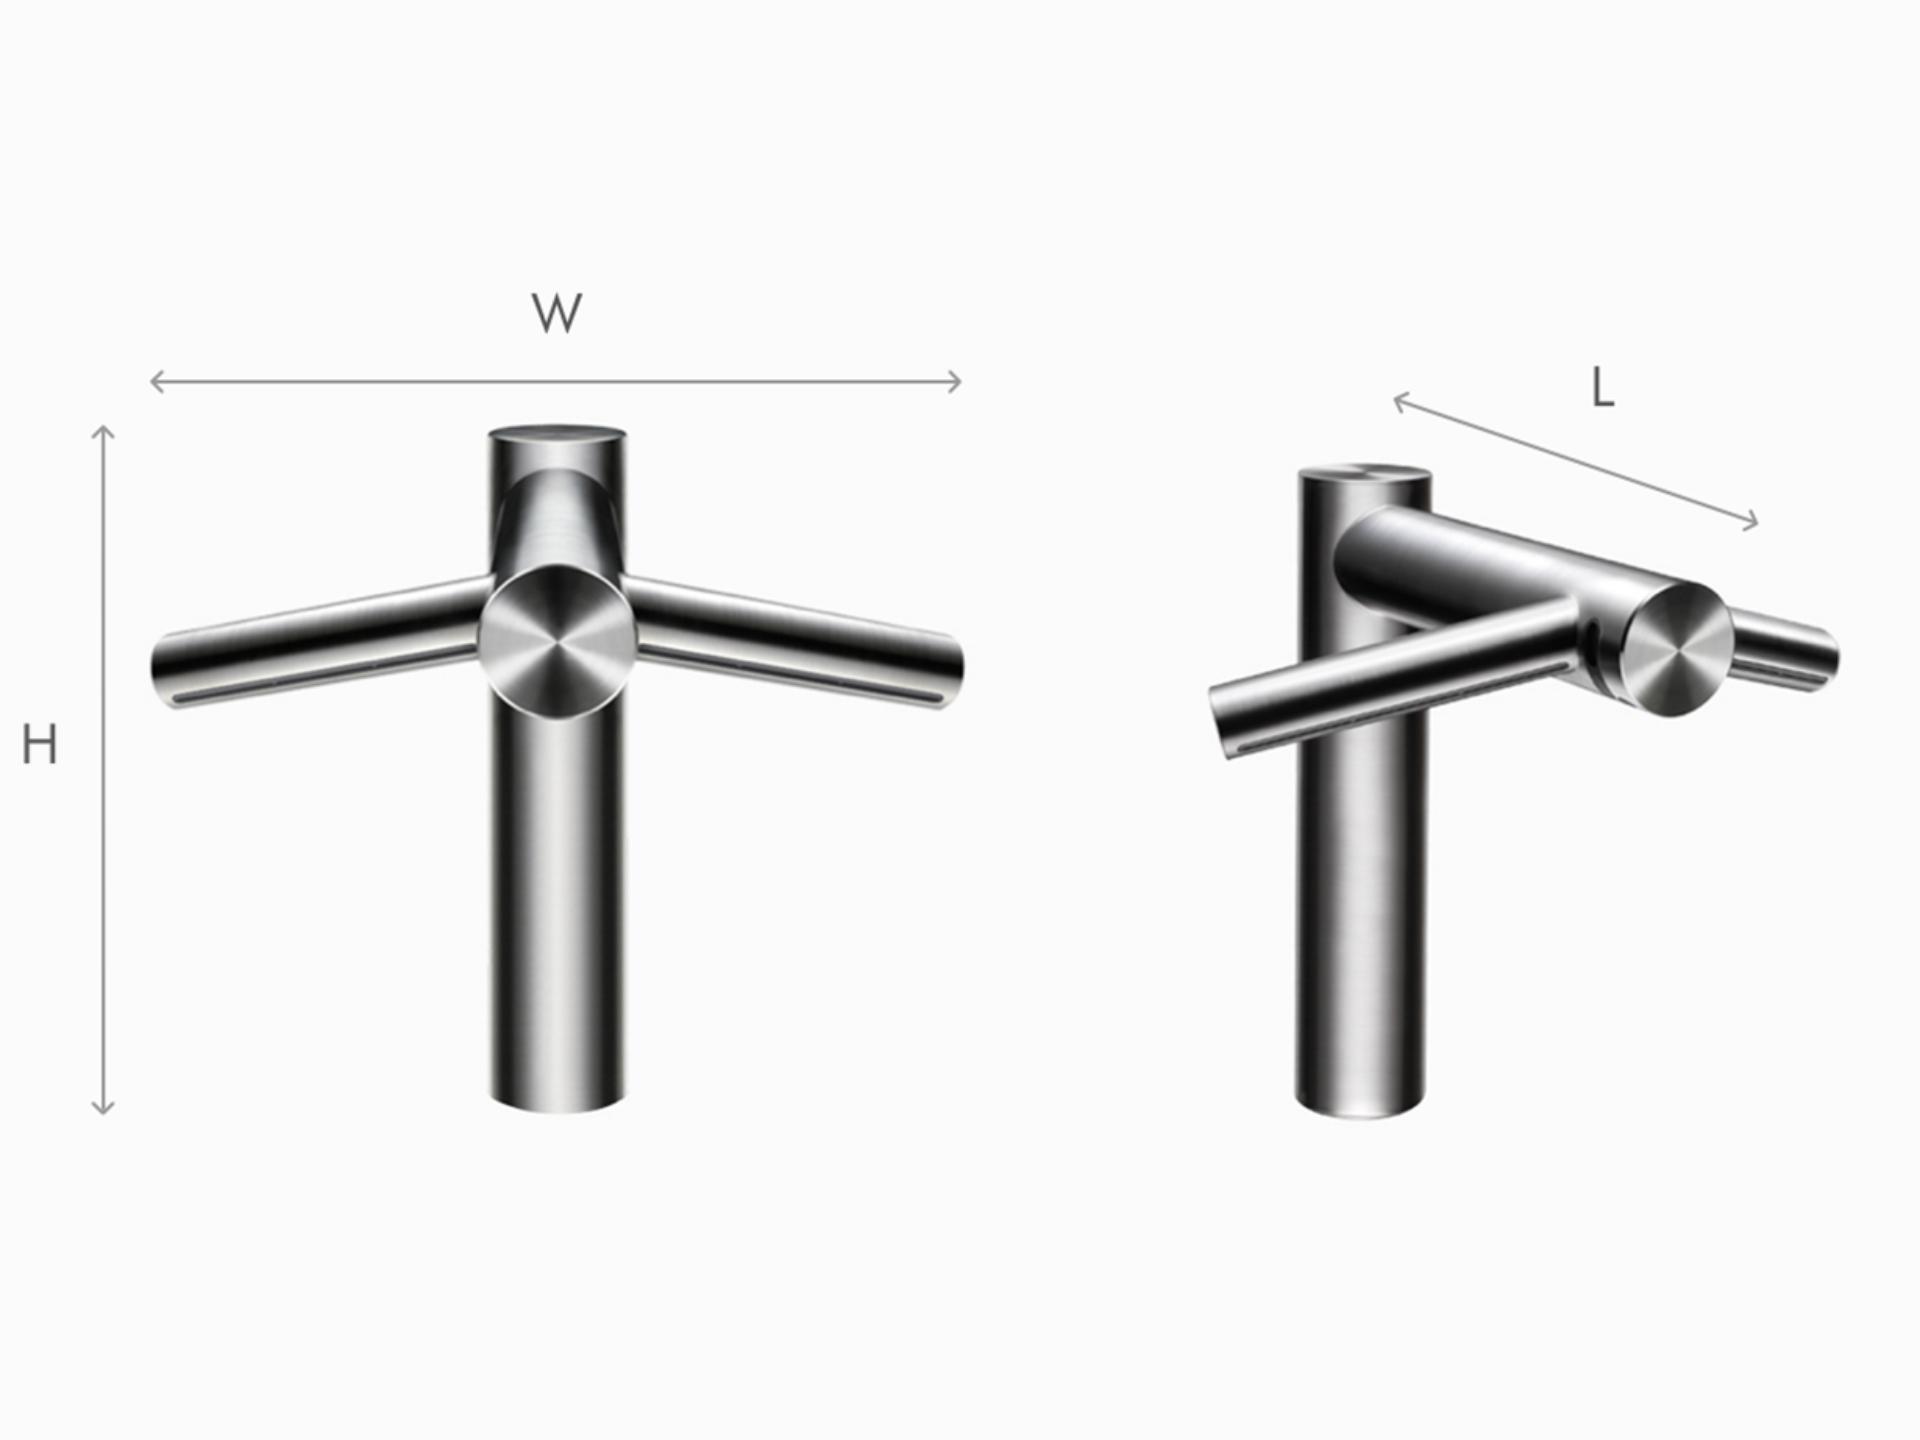 Illustration of Dyson Airblade Wash+Dry tall hand dryer dimensions